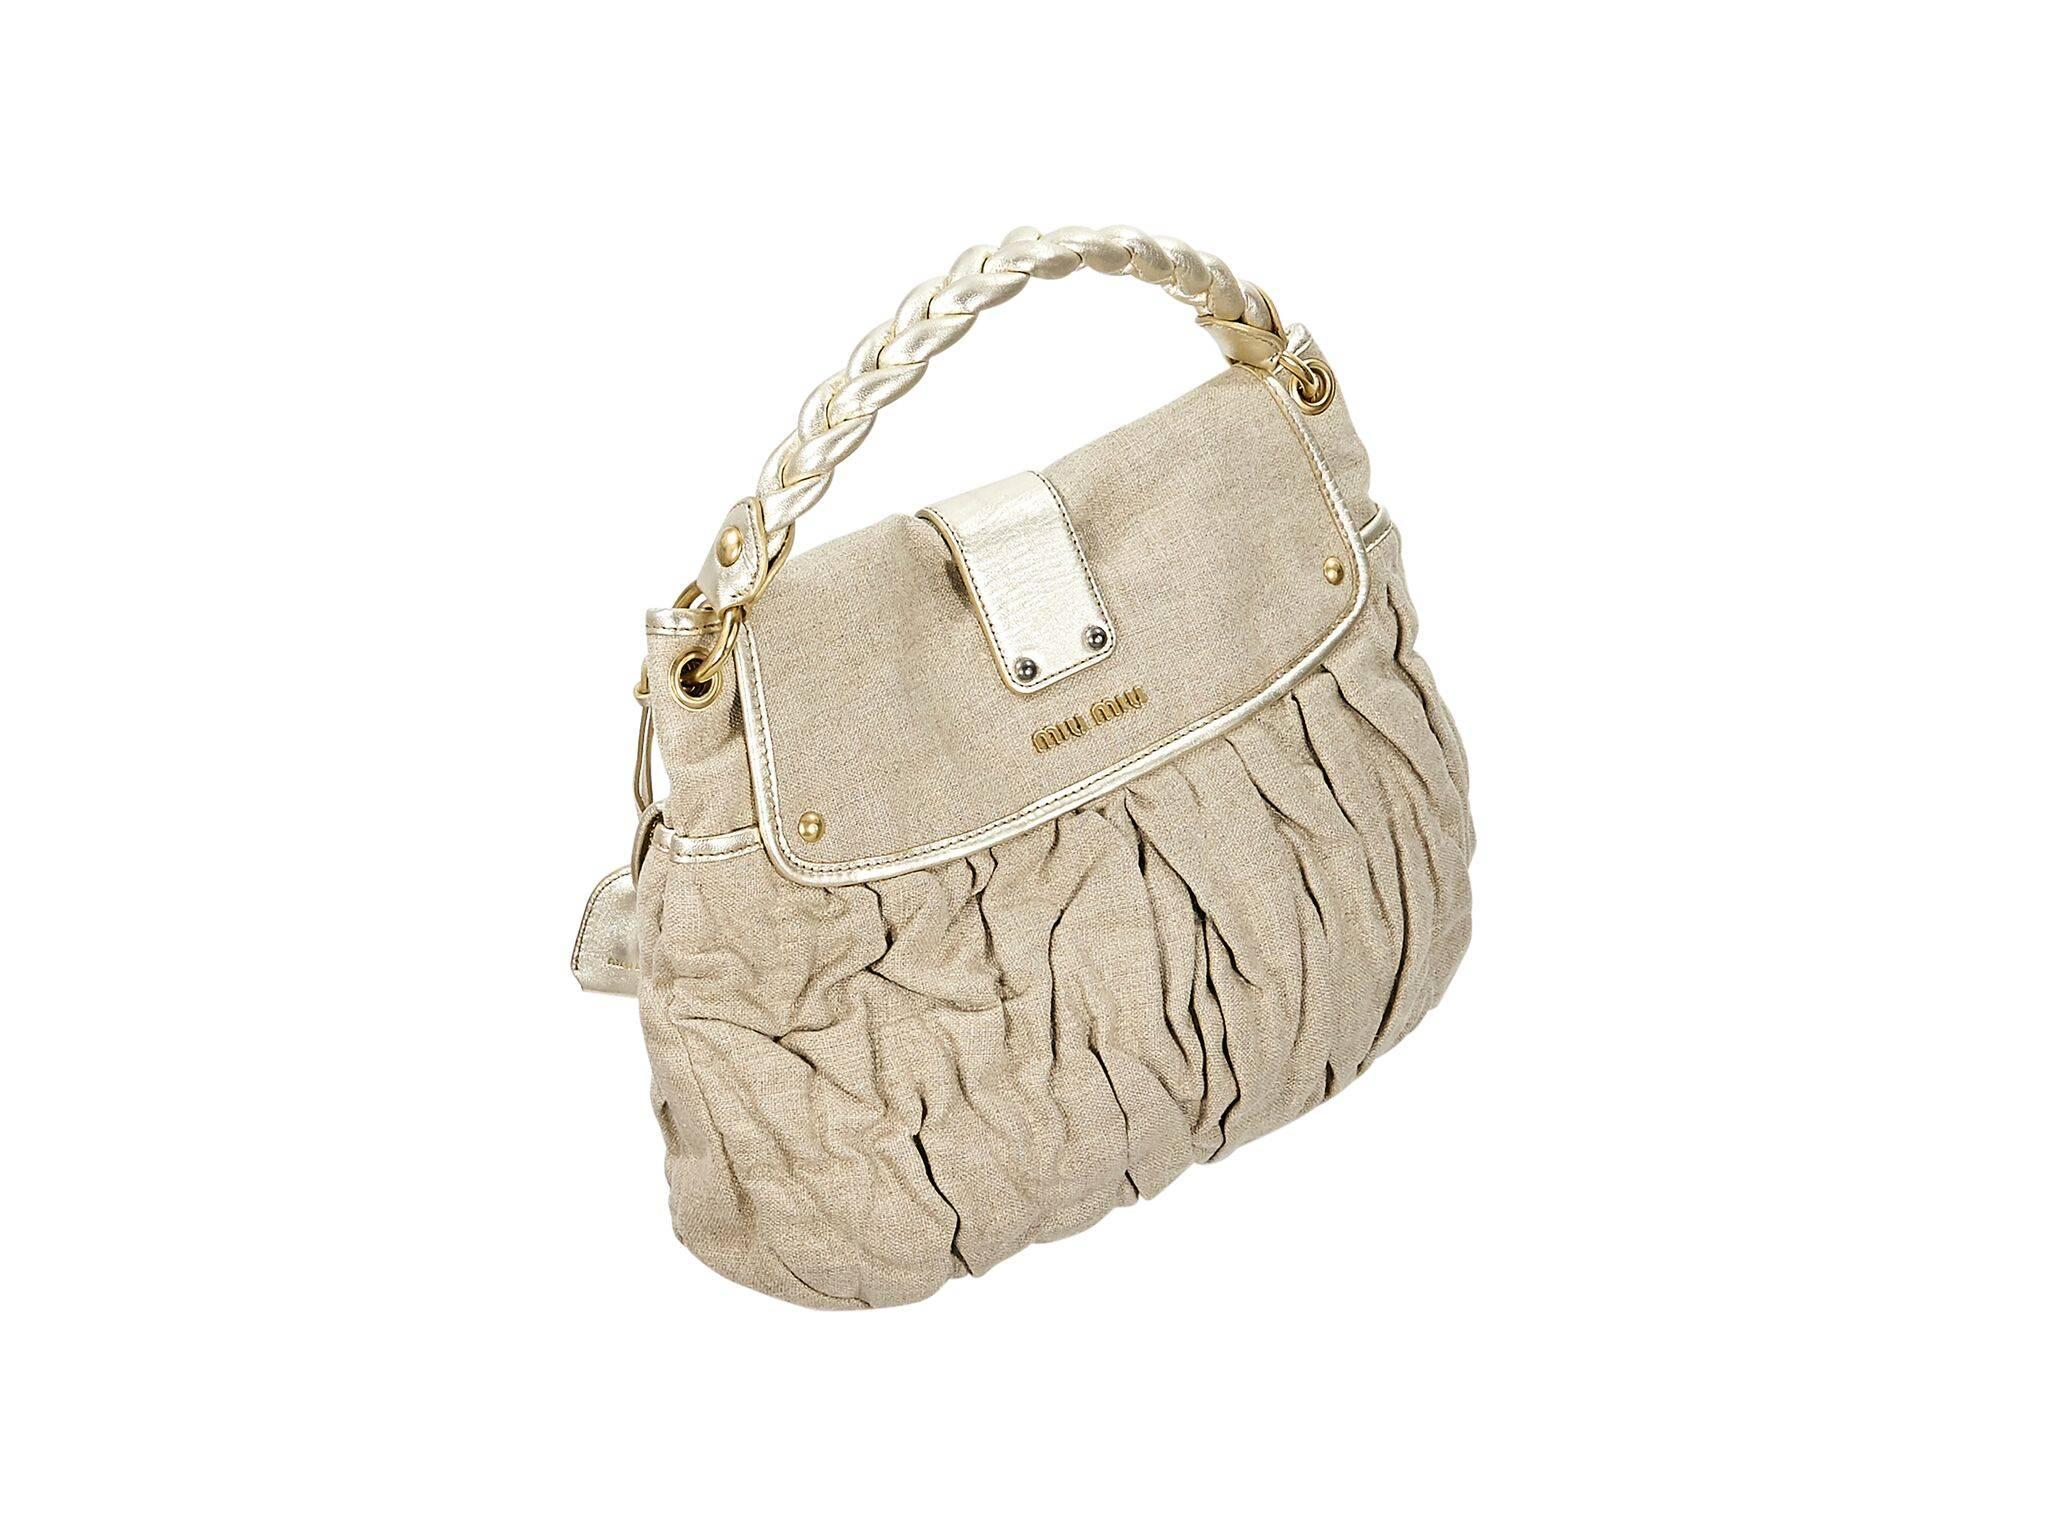 Product details:  Metallic gold canvas shoulder bag by Miu Miu.  Single braided shoulder strap.  Front flap with push-lock clasp closure.  Lined interior with inner zip pocket.  Goldtone hardware.  15.5